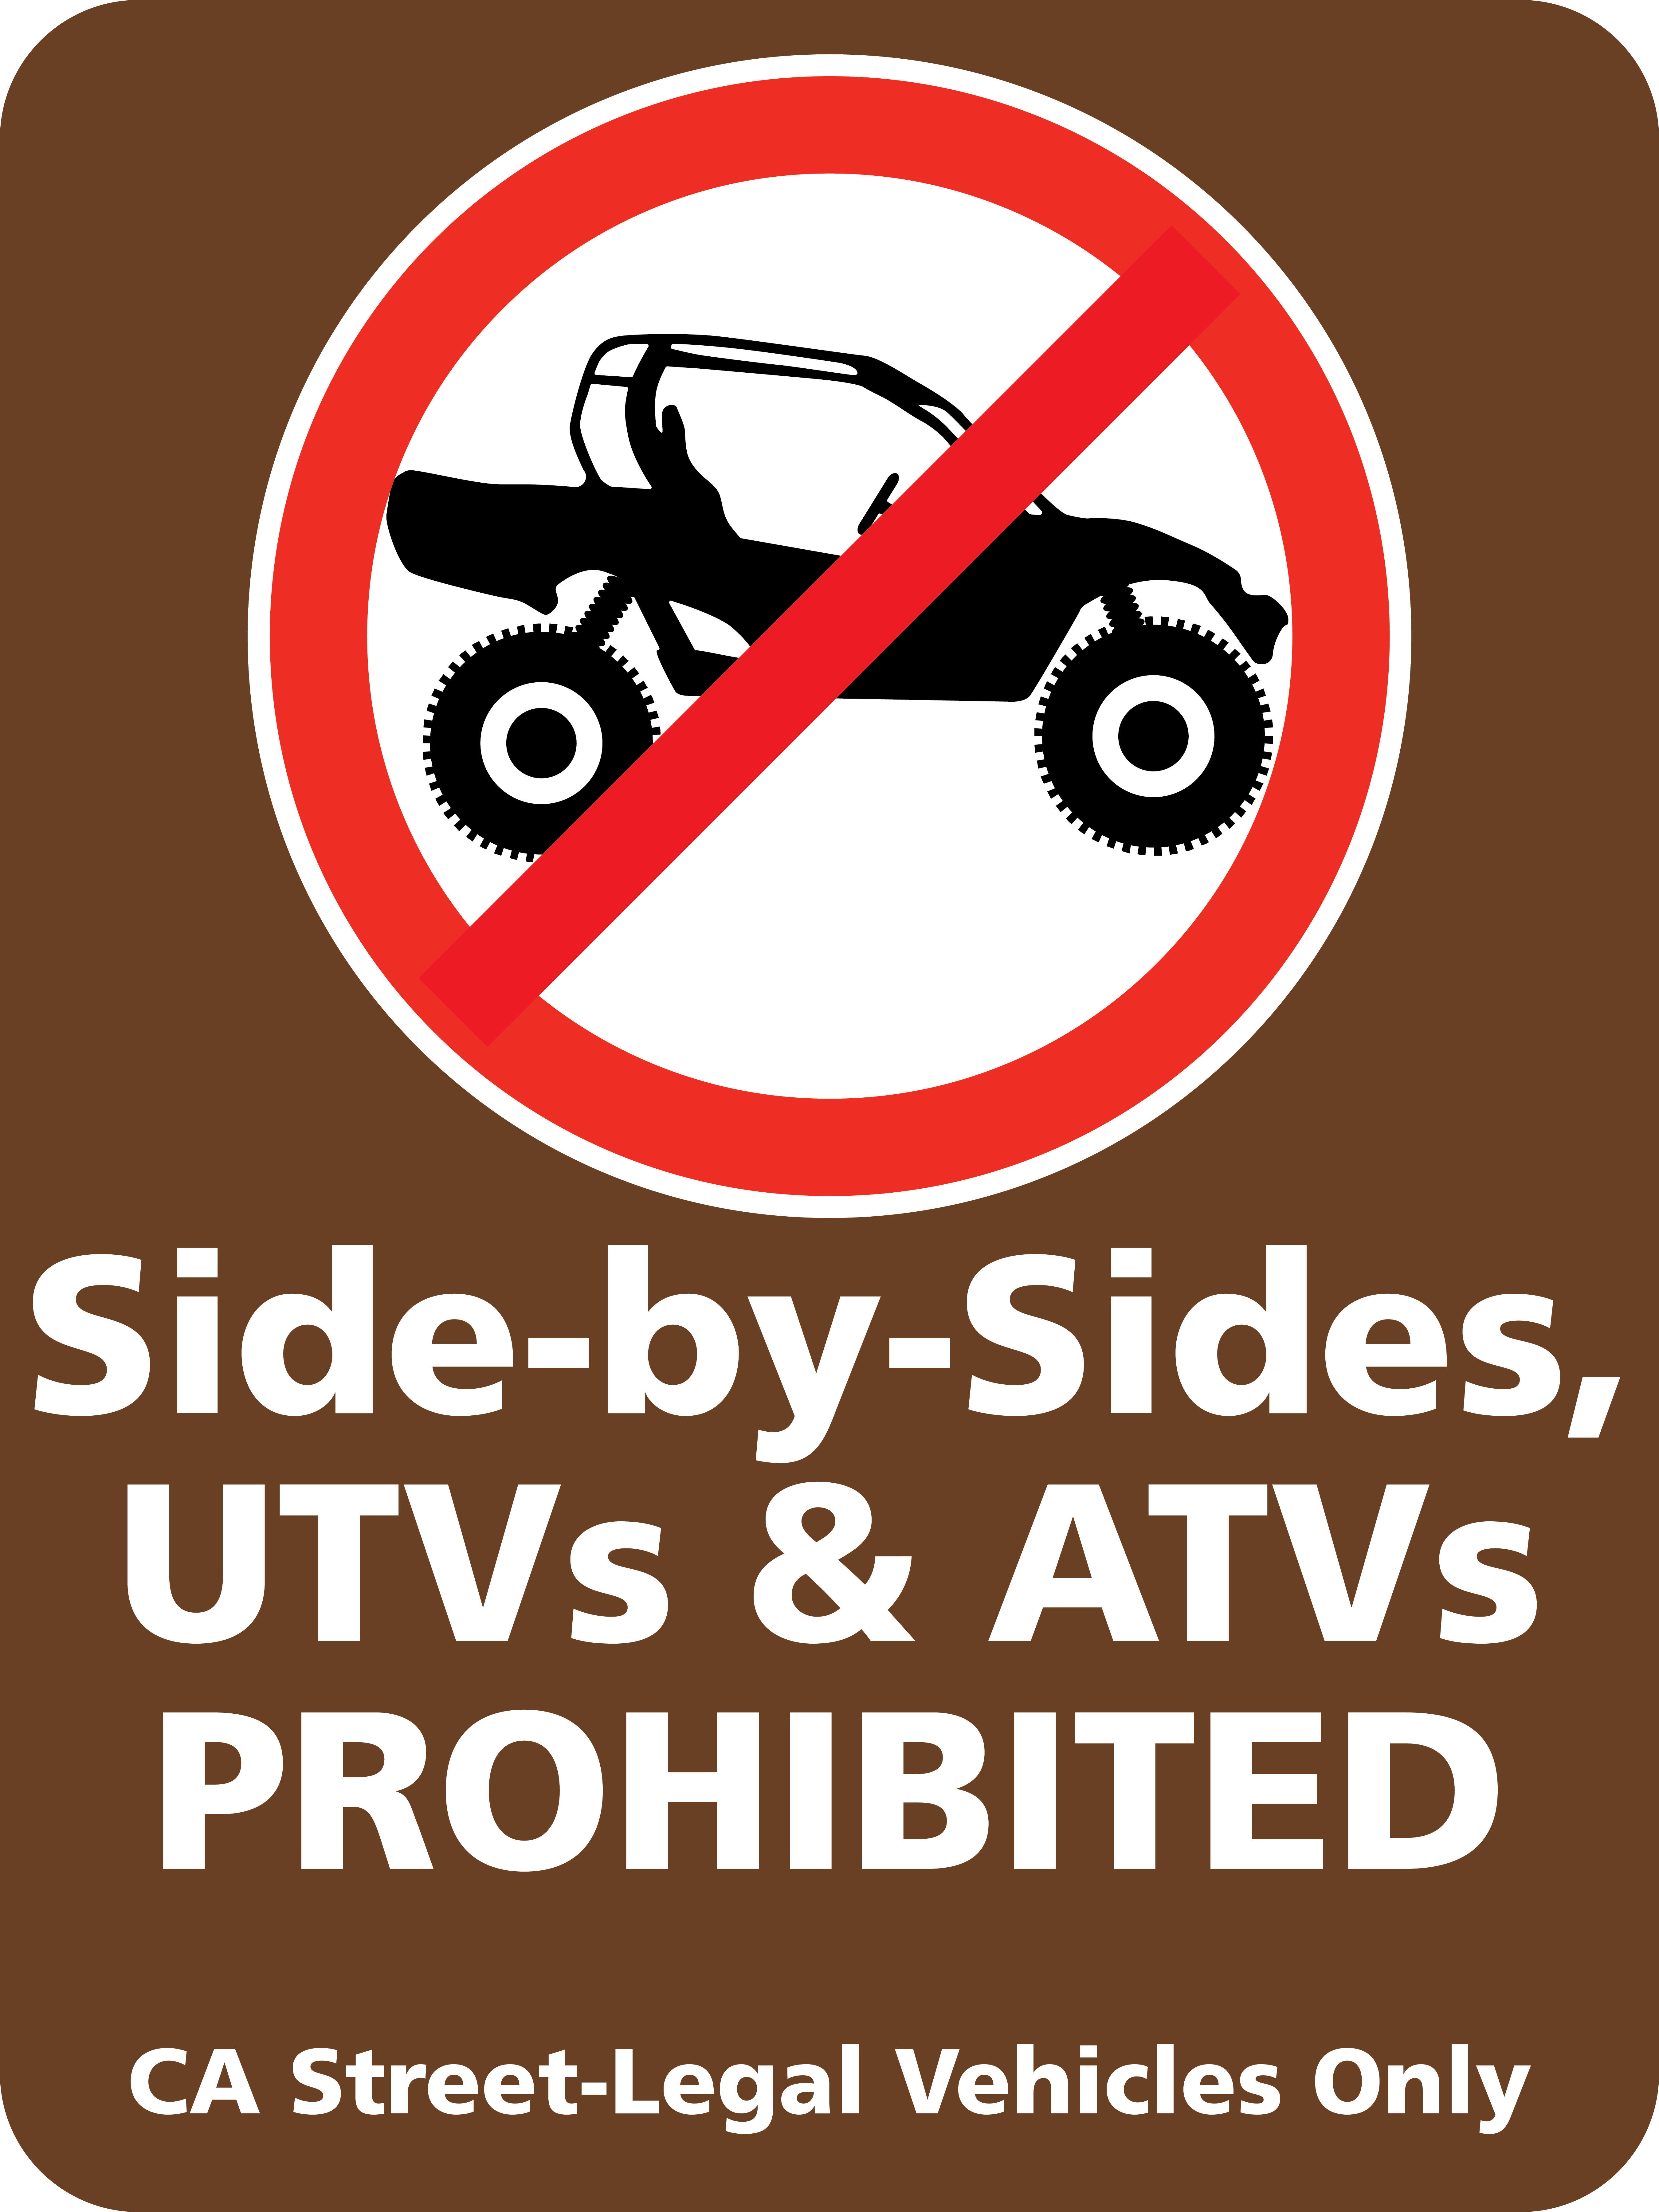 Image of a sign with outline of a UTV with red circle and slash, Text reads Side-by-sides, UTVs & ATVs PROHIBITED CA Steet Legal Vehicles Only